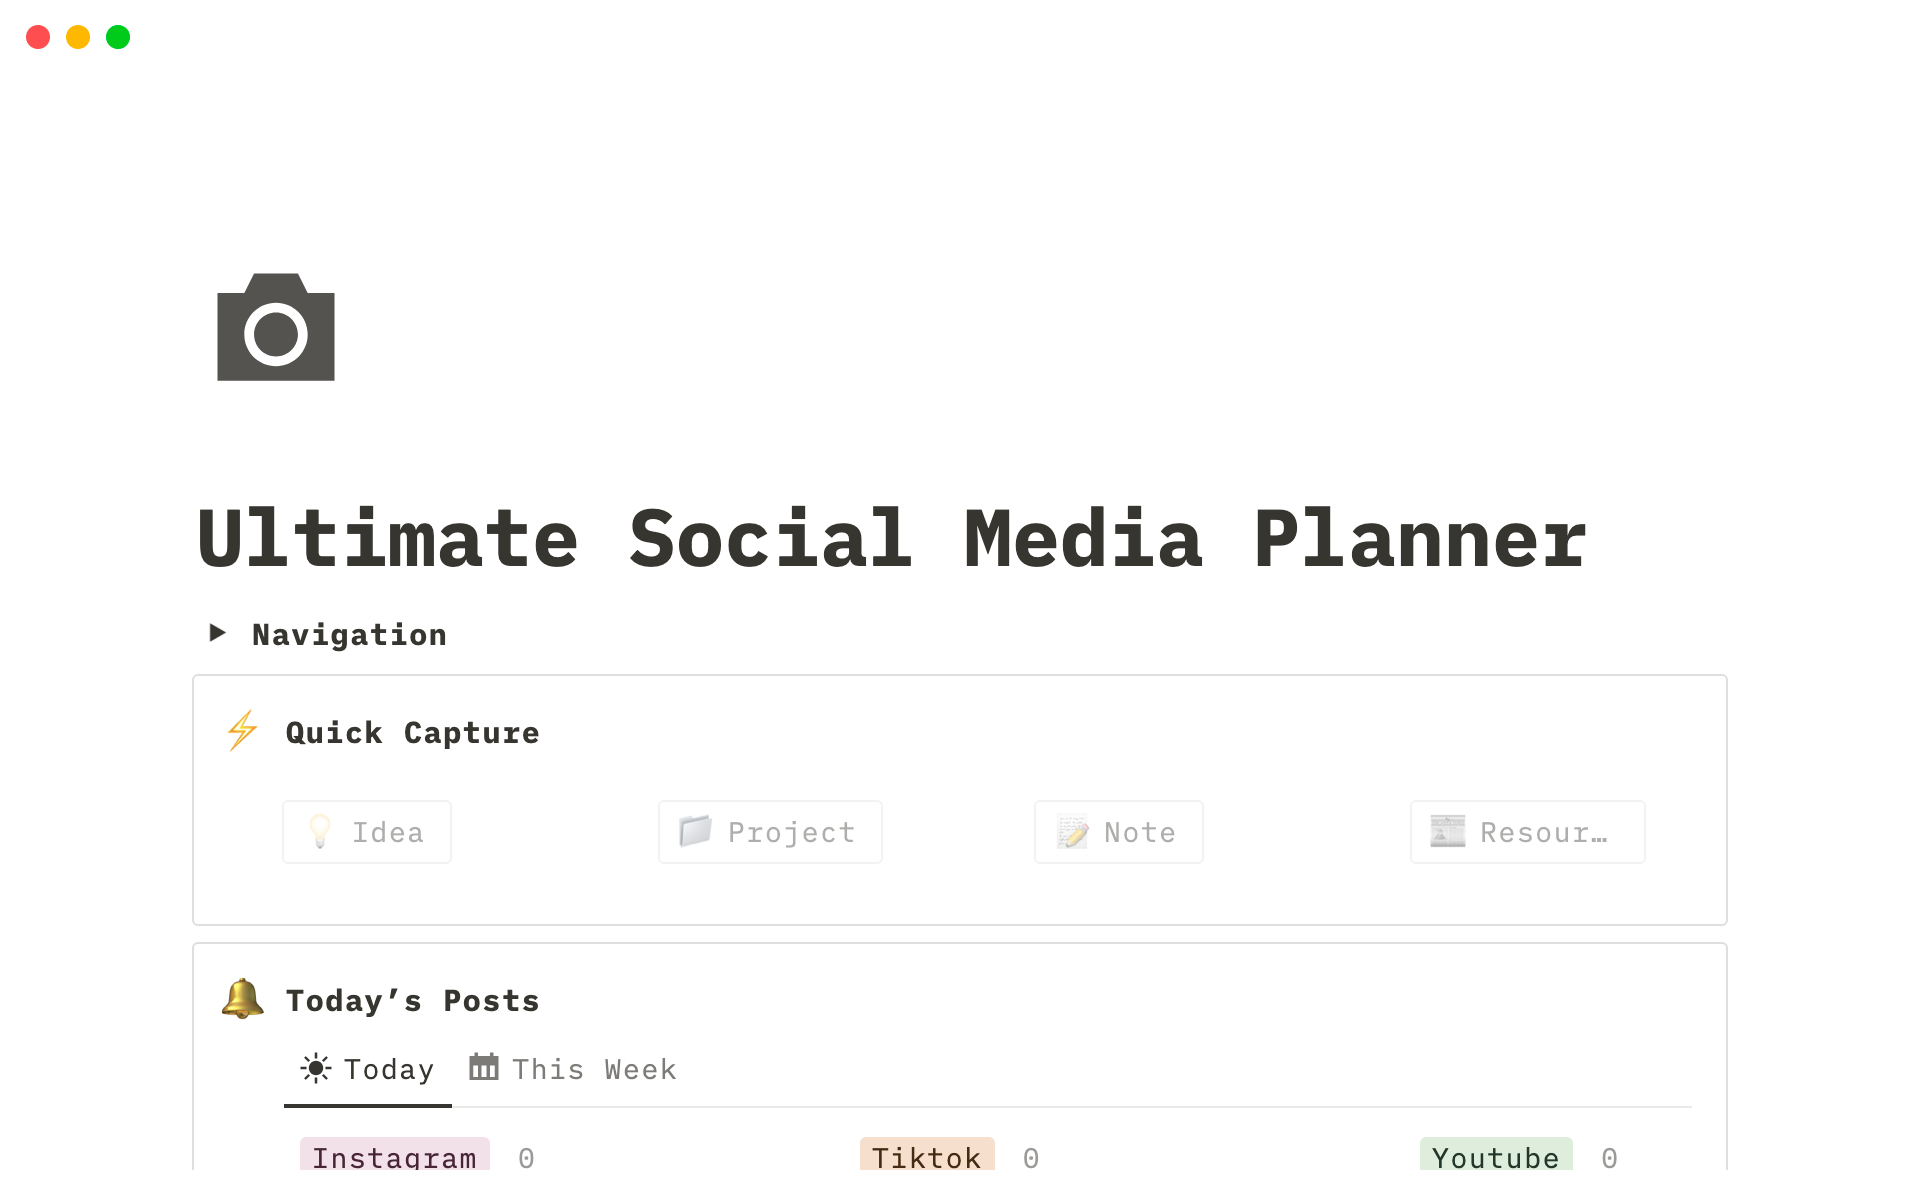 The Ultimate Social Media Planner Notion Template